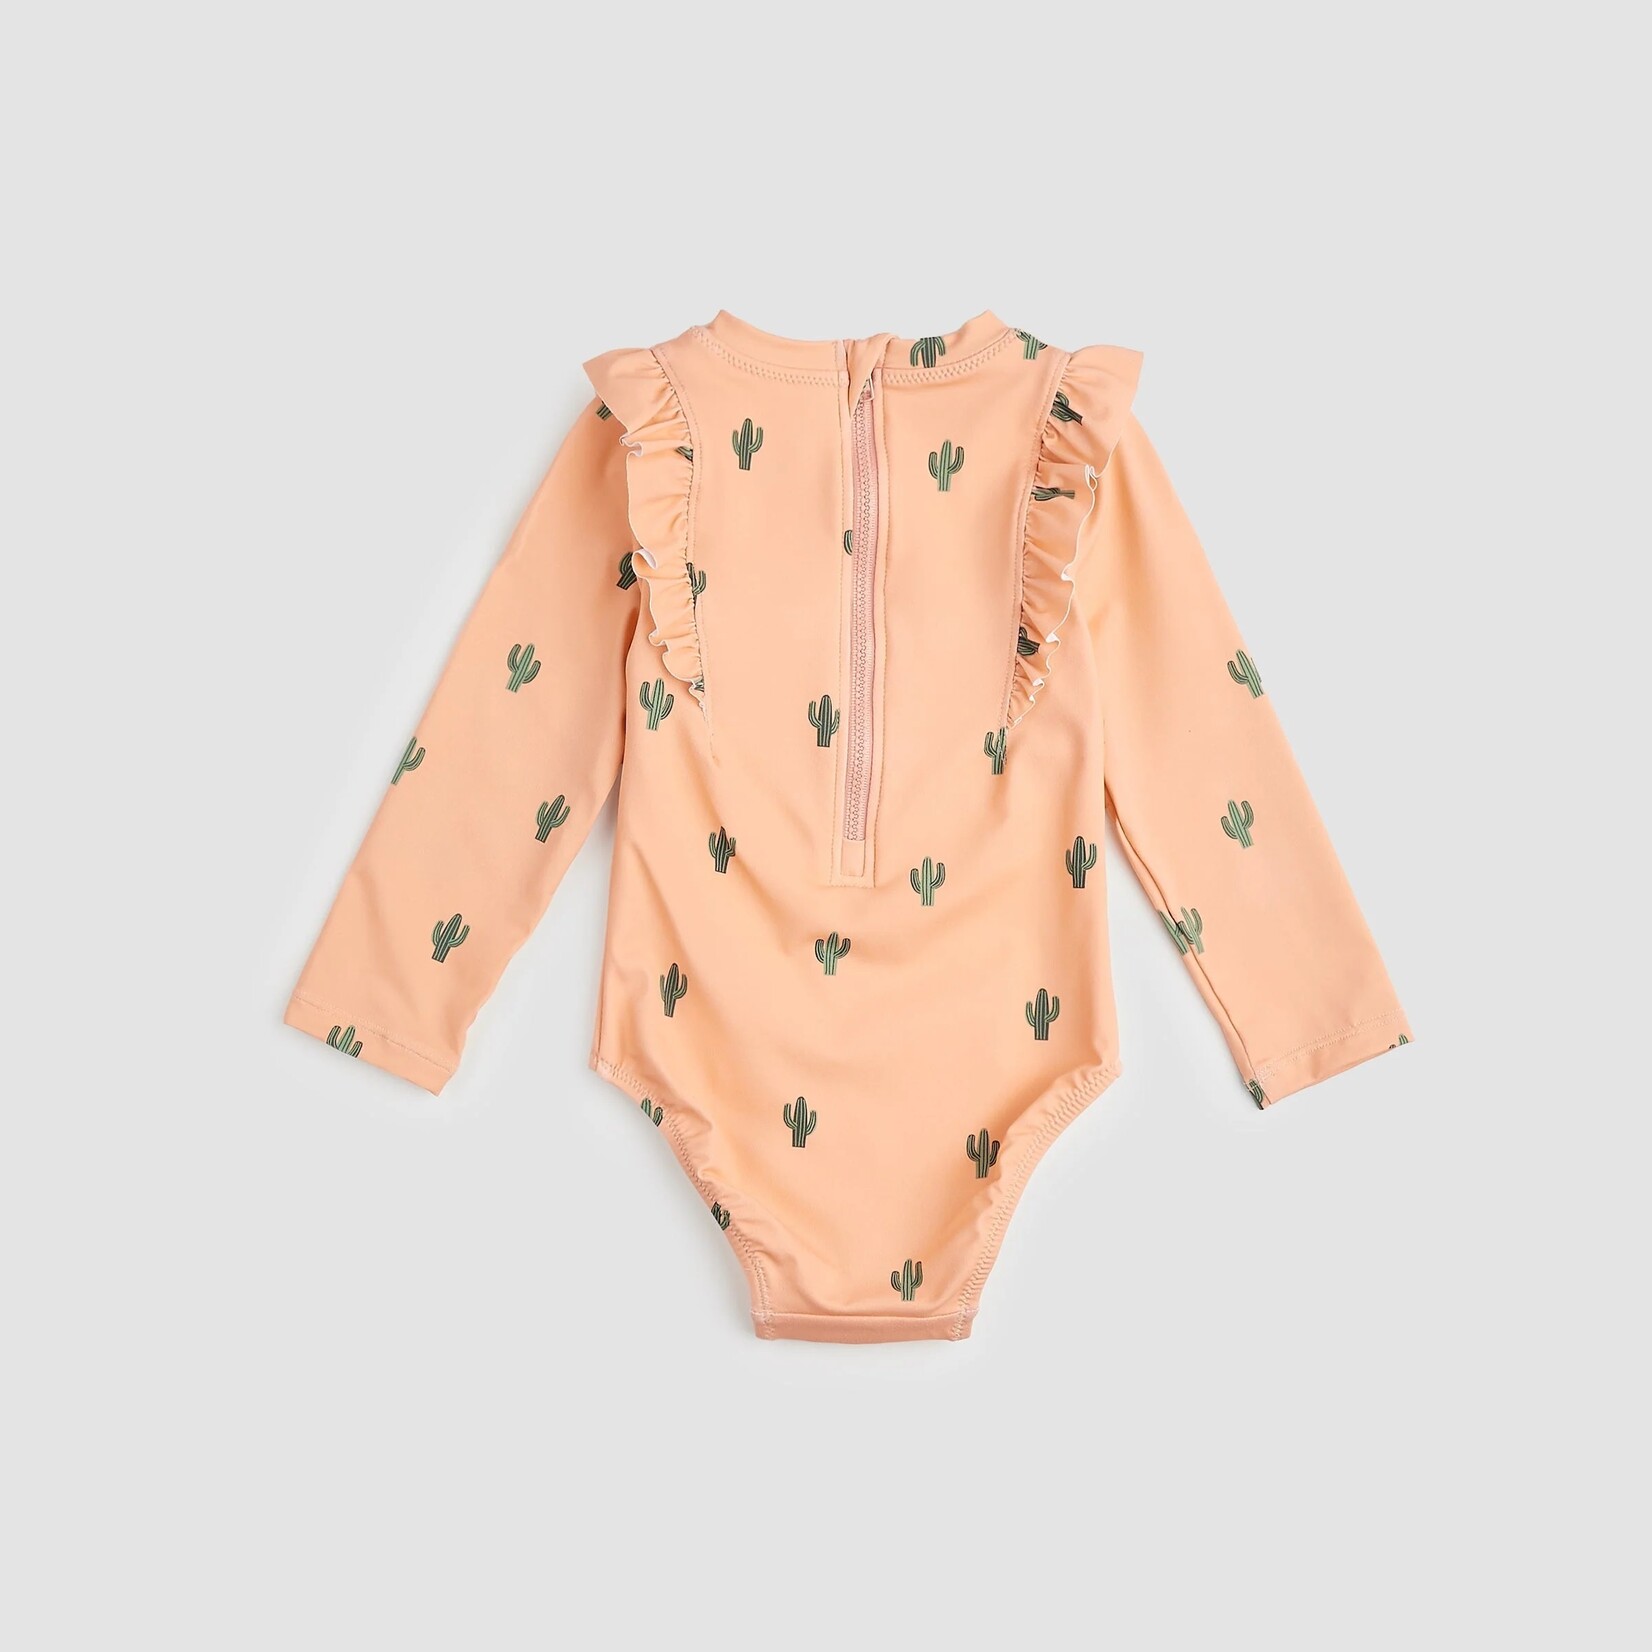 Miles the label MILES THE LABEL - One-piece Orange Rashguard Swimsuit With Long Sleeves And Cactus Print